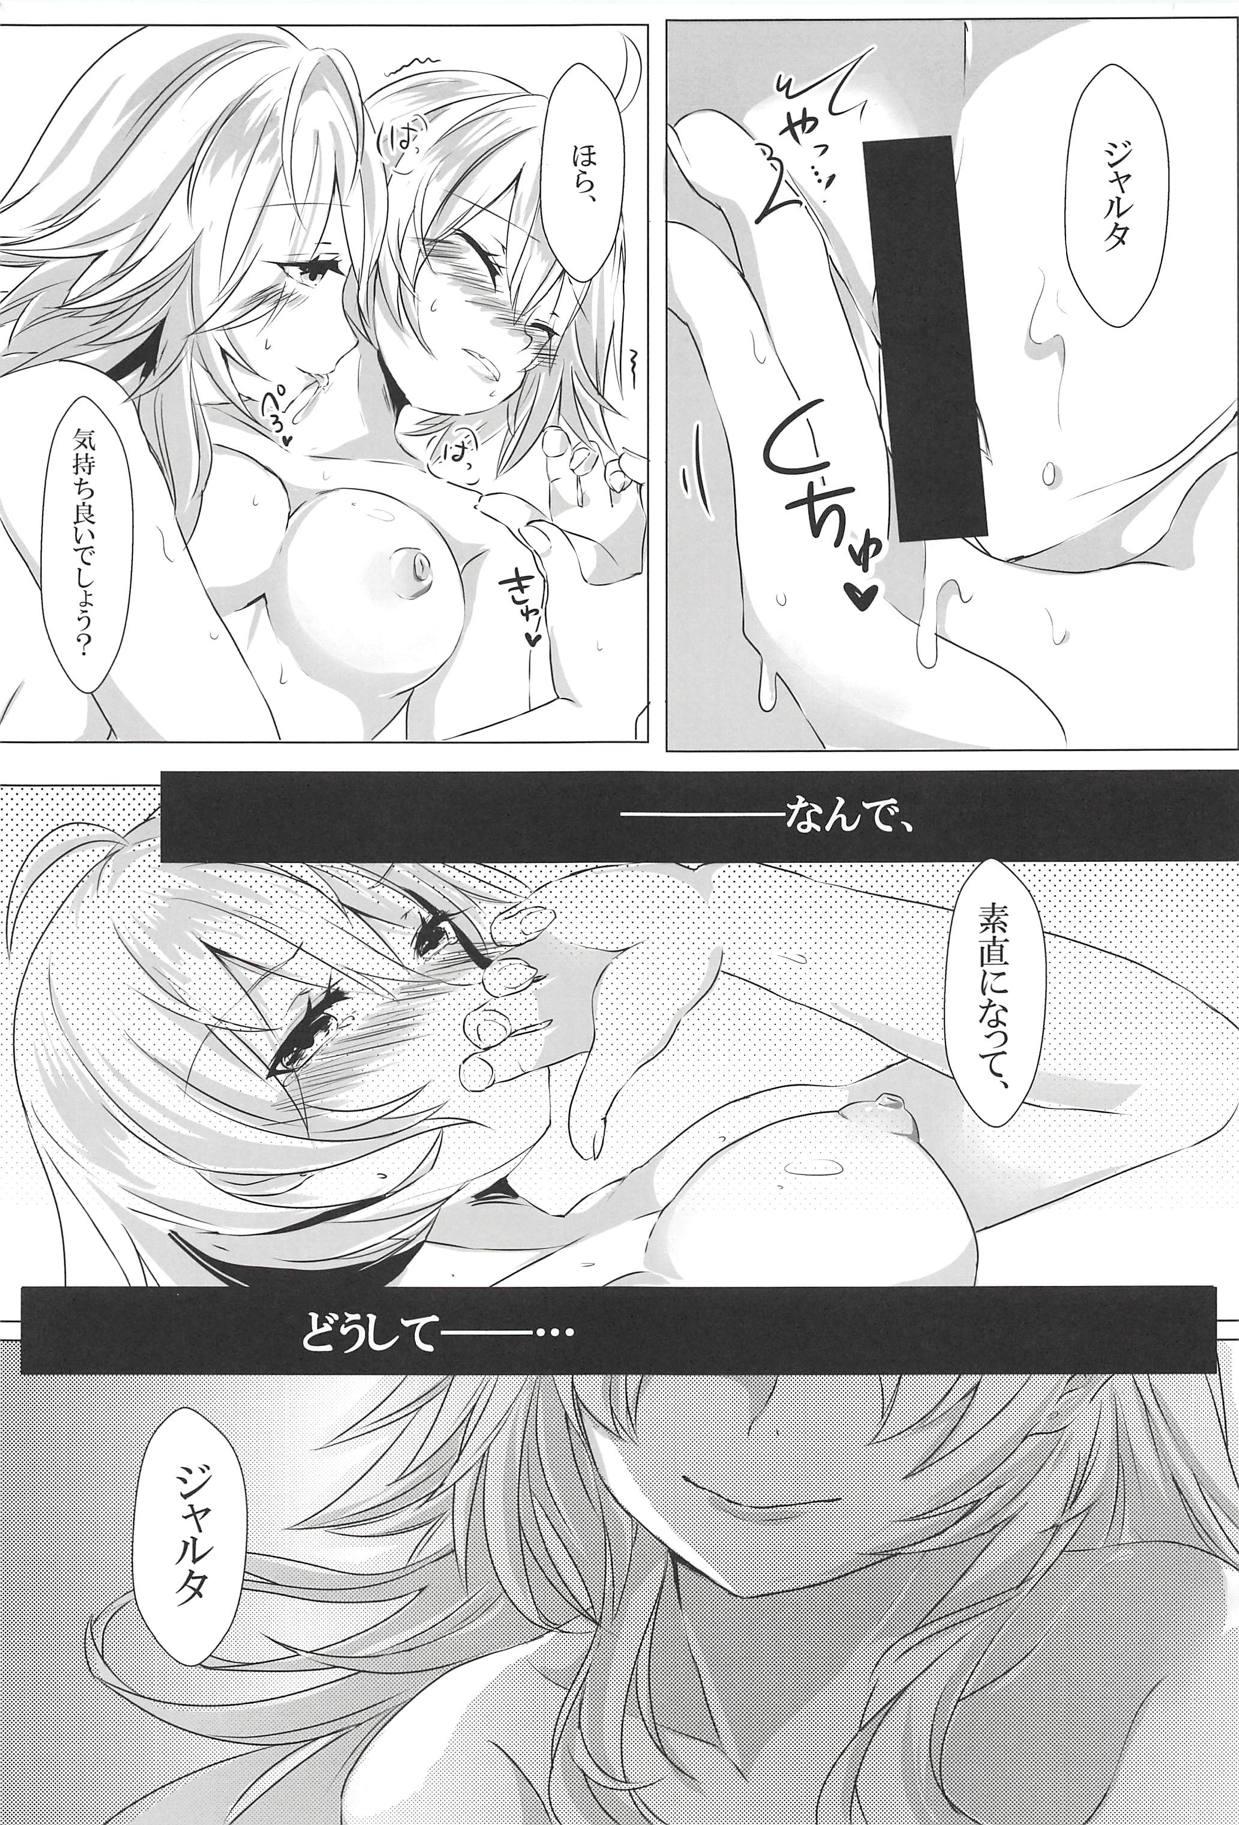 Tamil TWIN SCANDAL - Fate grand order Amateur Sex - Page 6